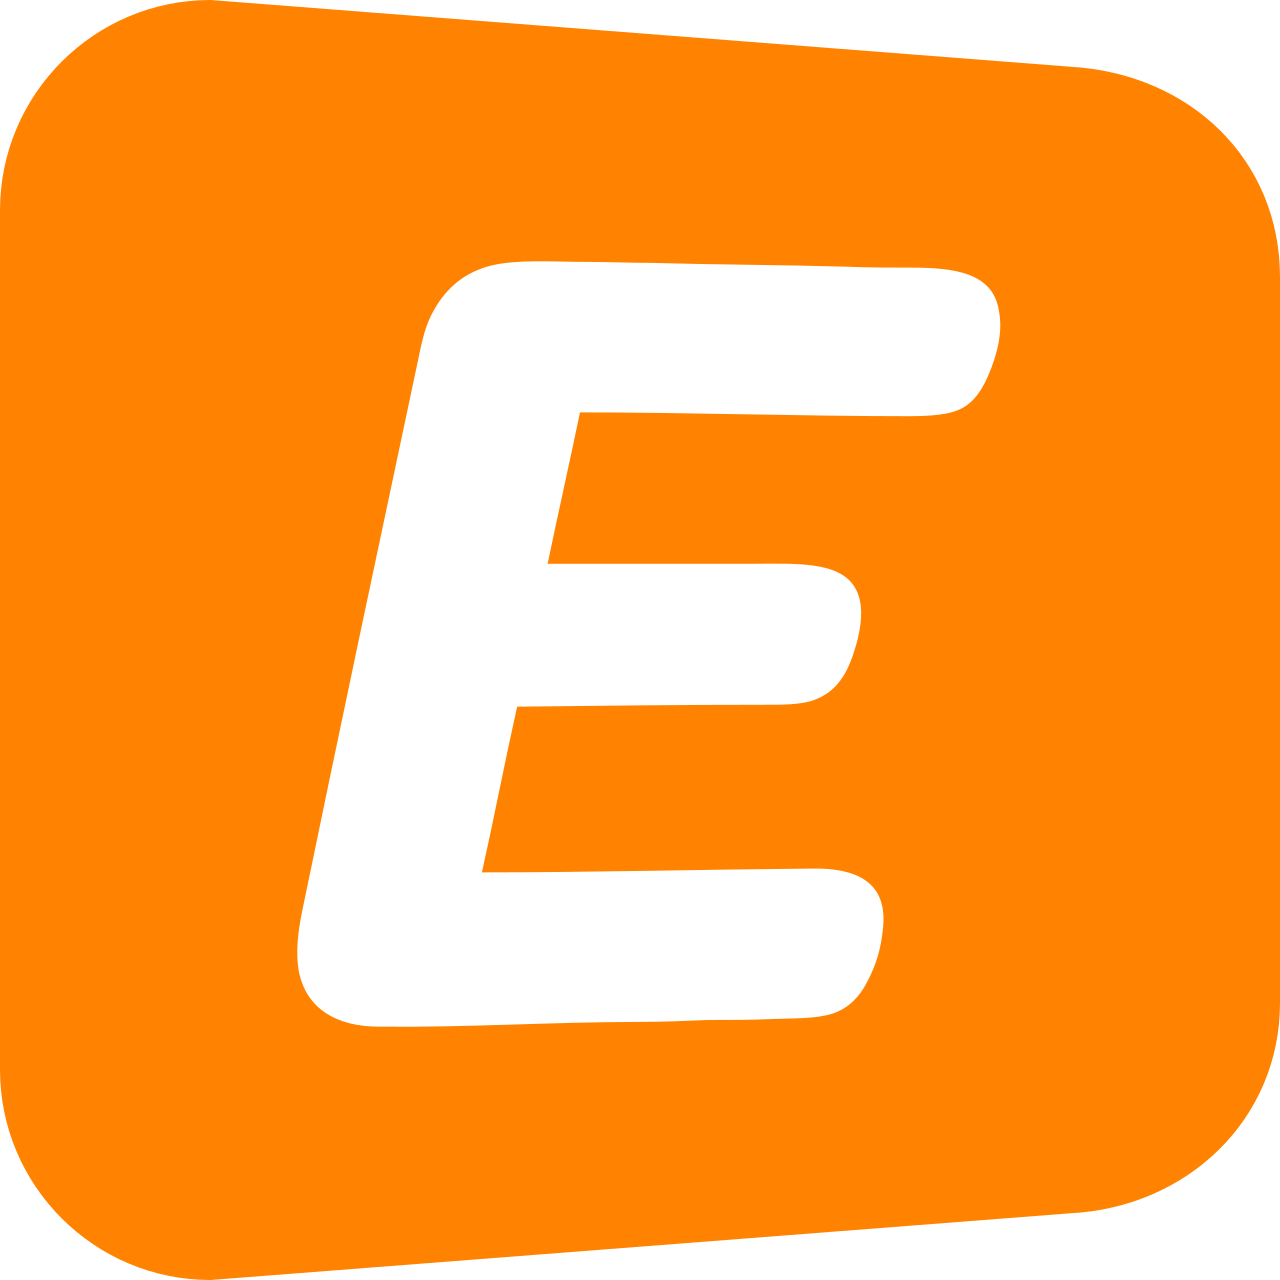 Download Eventbrite badge Logo PNG and Vector (PDF, SVG, Ai, EPS) Free